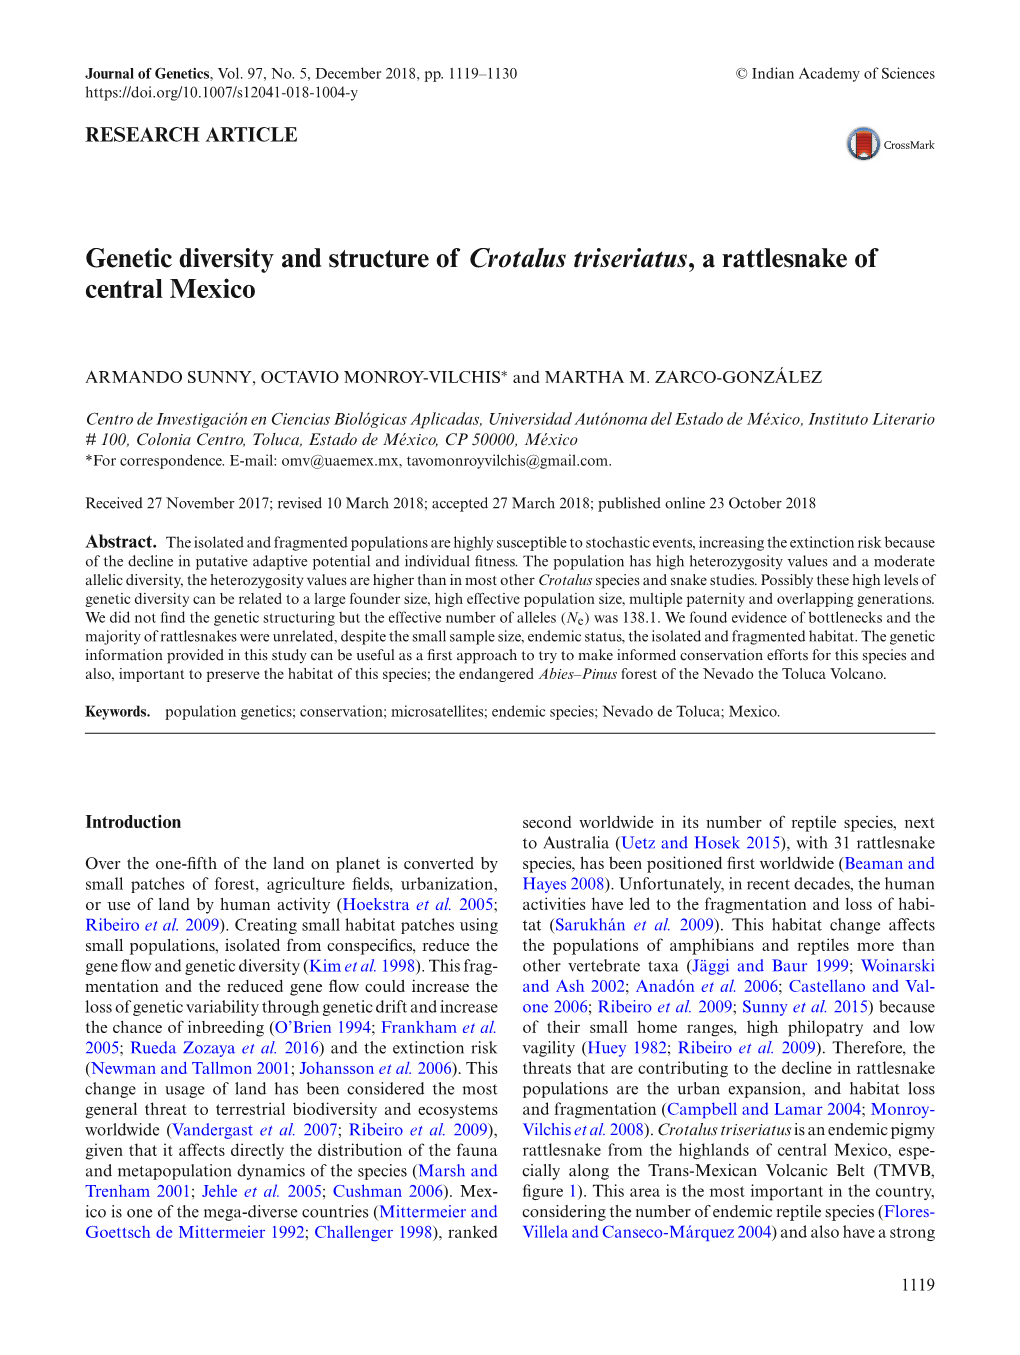 Genetic Diversity and Structure of Crotalus Triseriatus, a Rattlesnake of Central Mexico